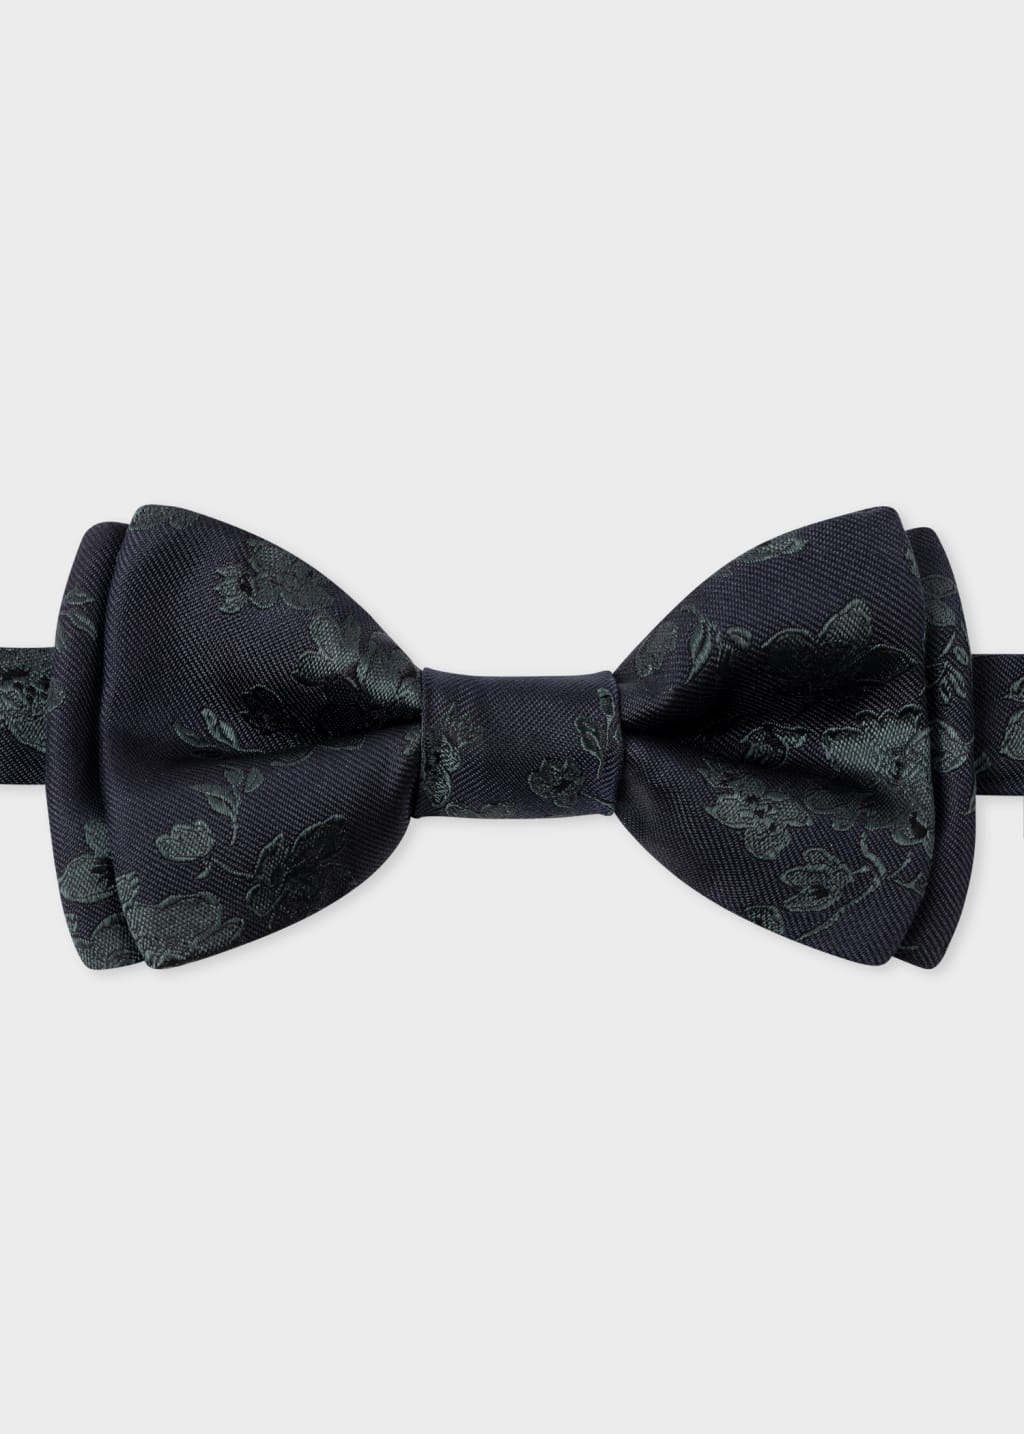 Front View - Black Silk Floral Bow Tie Paul Smith